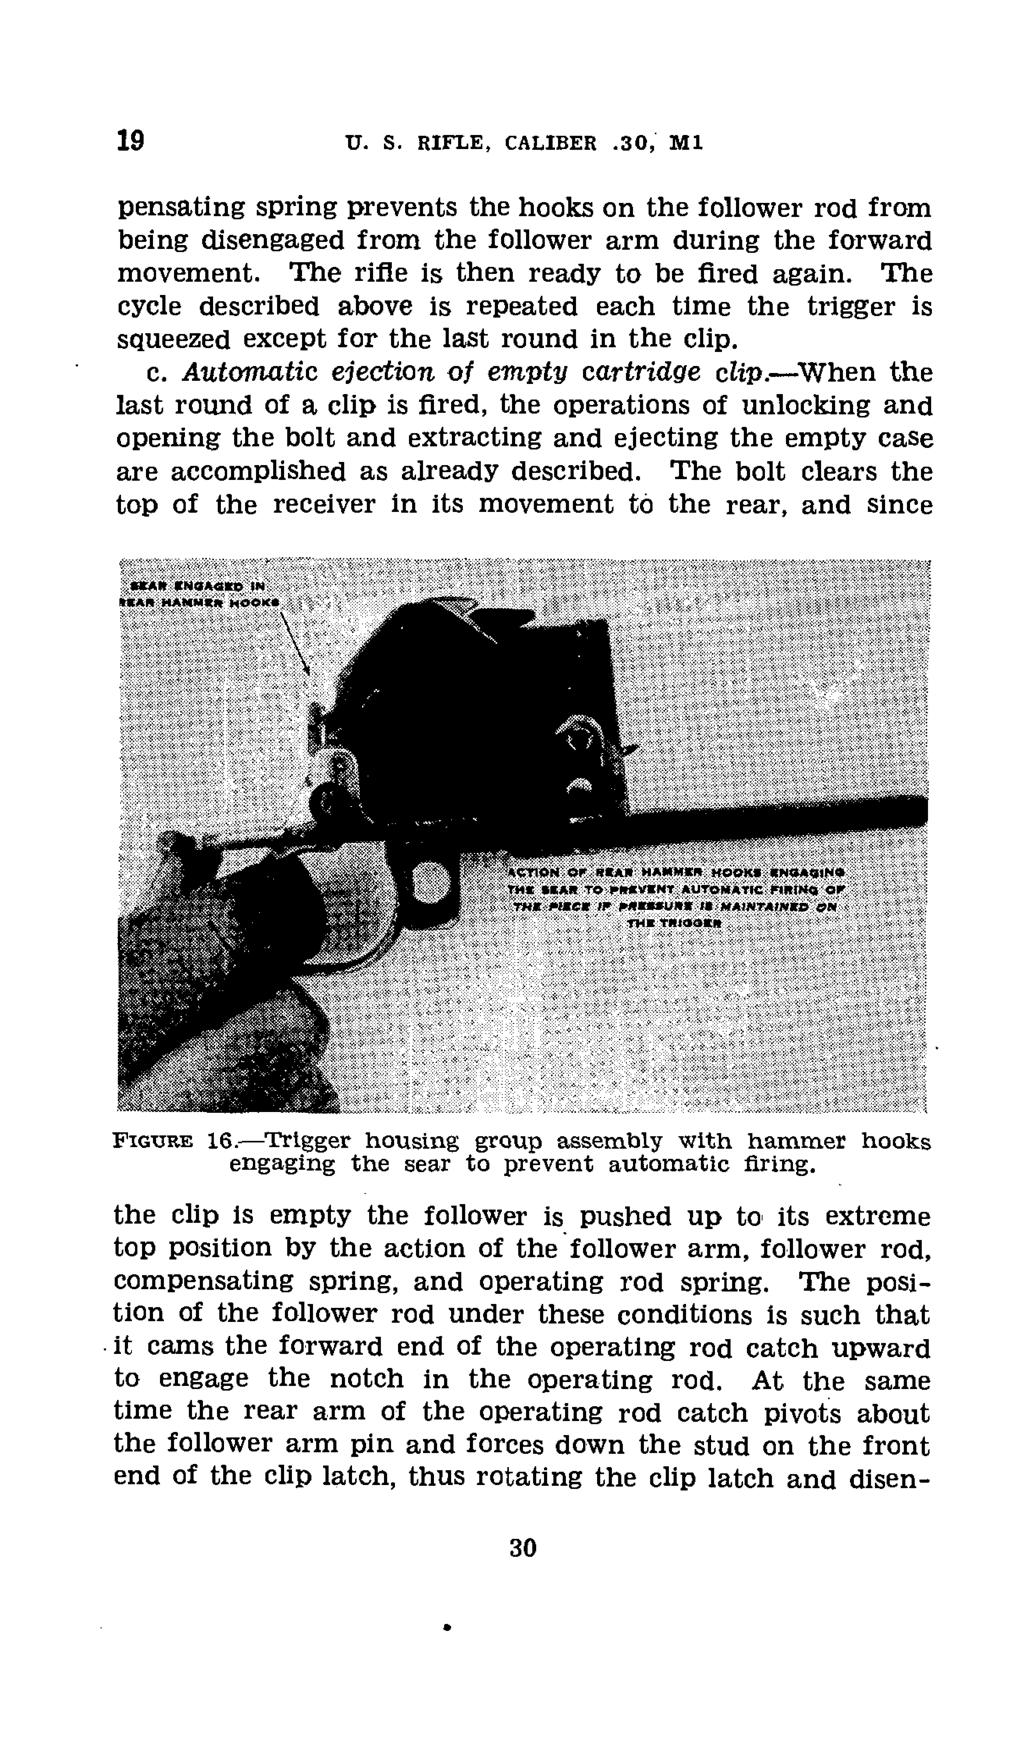 19 u. s. RIFLE, CALIBER.30, M1 pensating spring prevents the hooks on the follower rod from being disengaged from the follower arm during the forward movement.